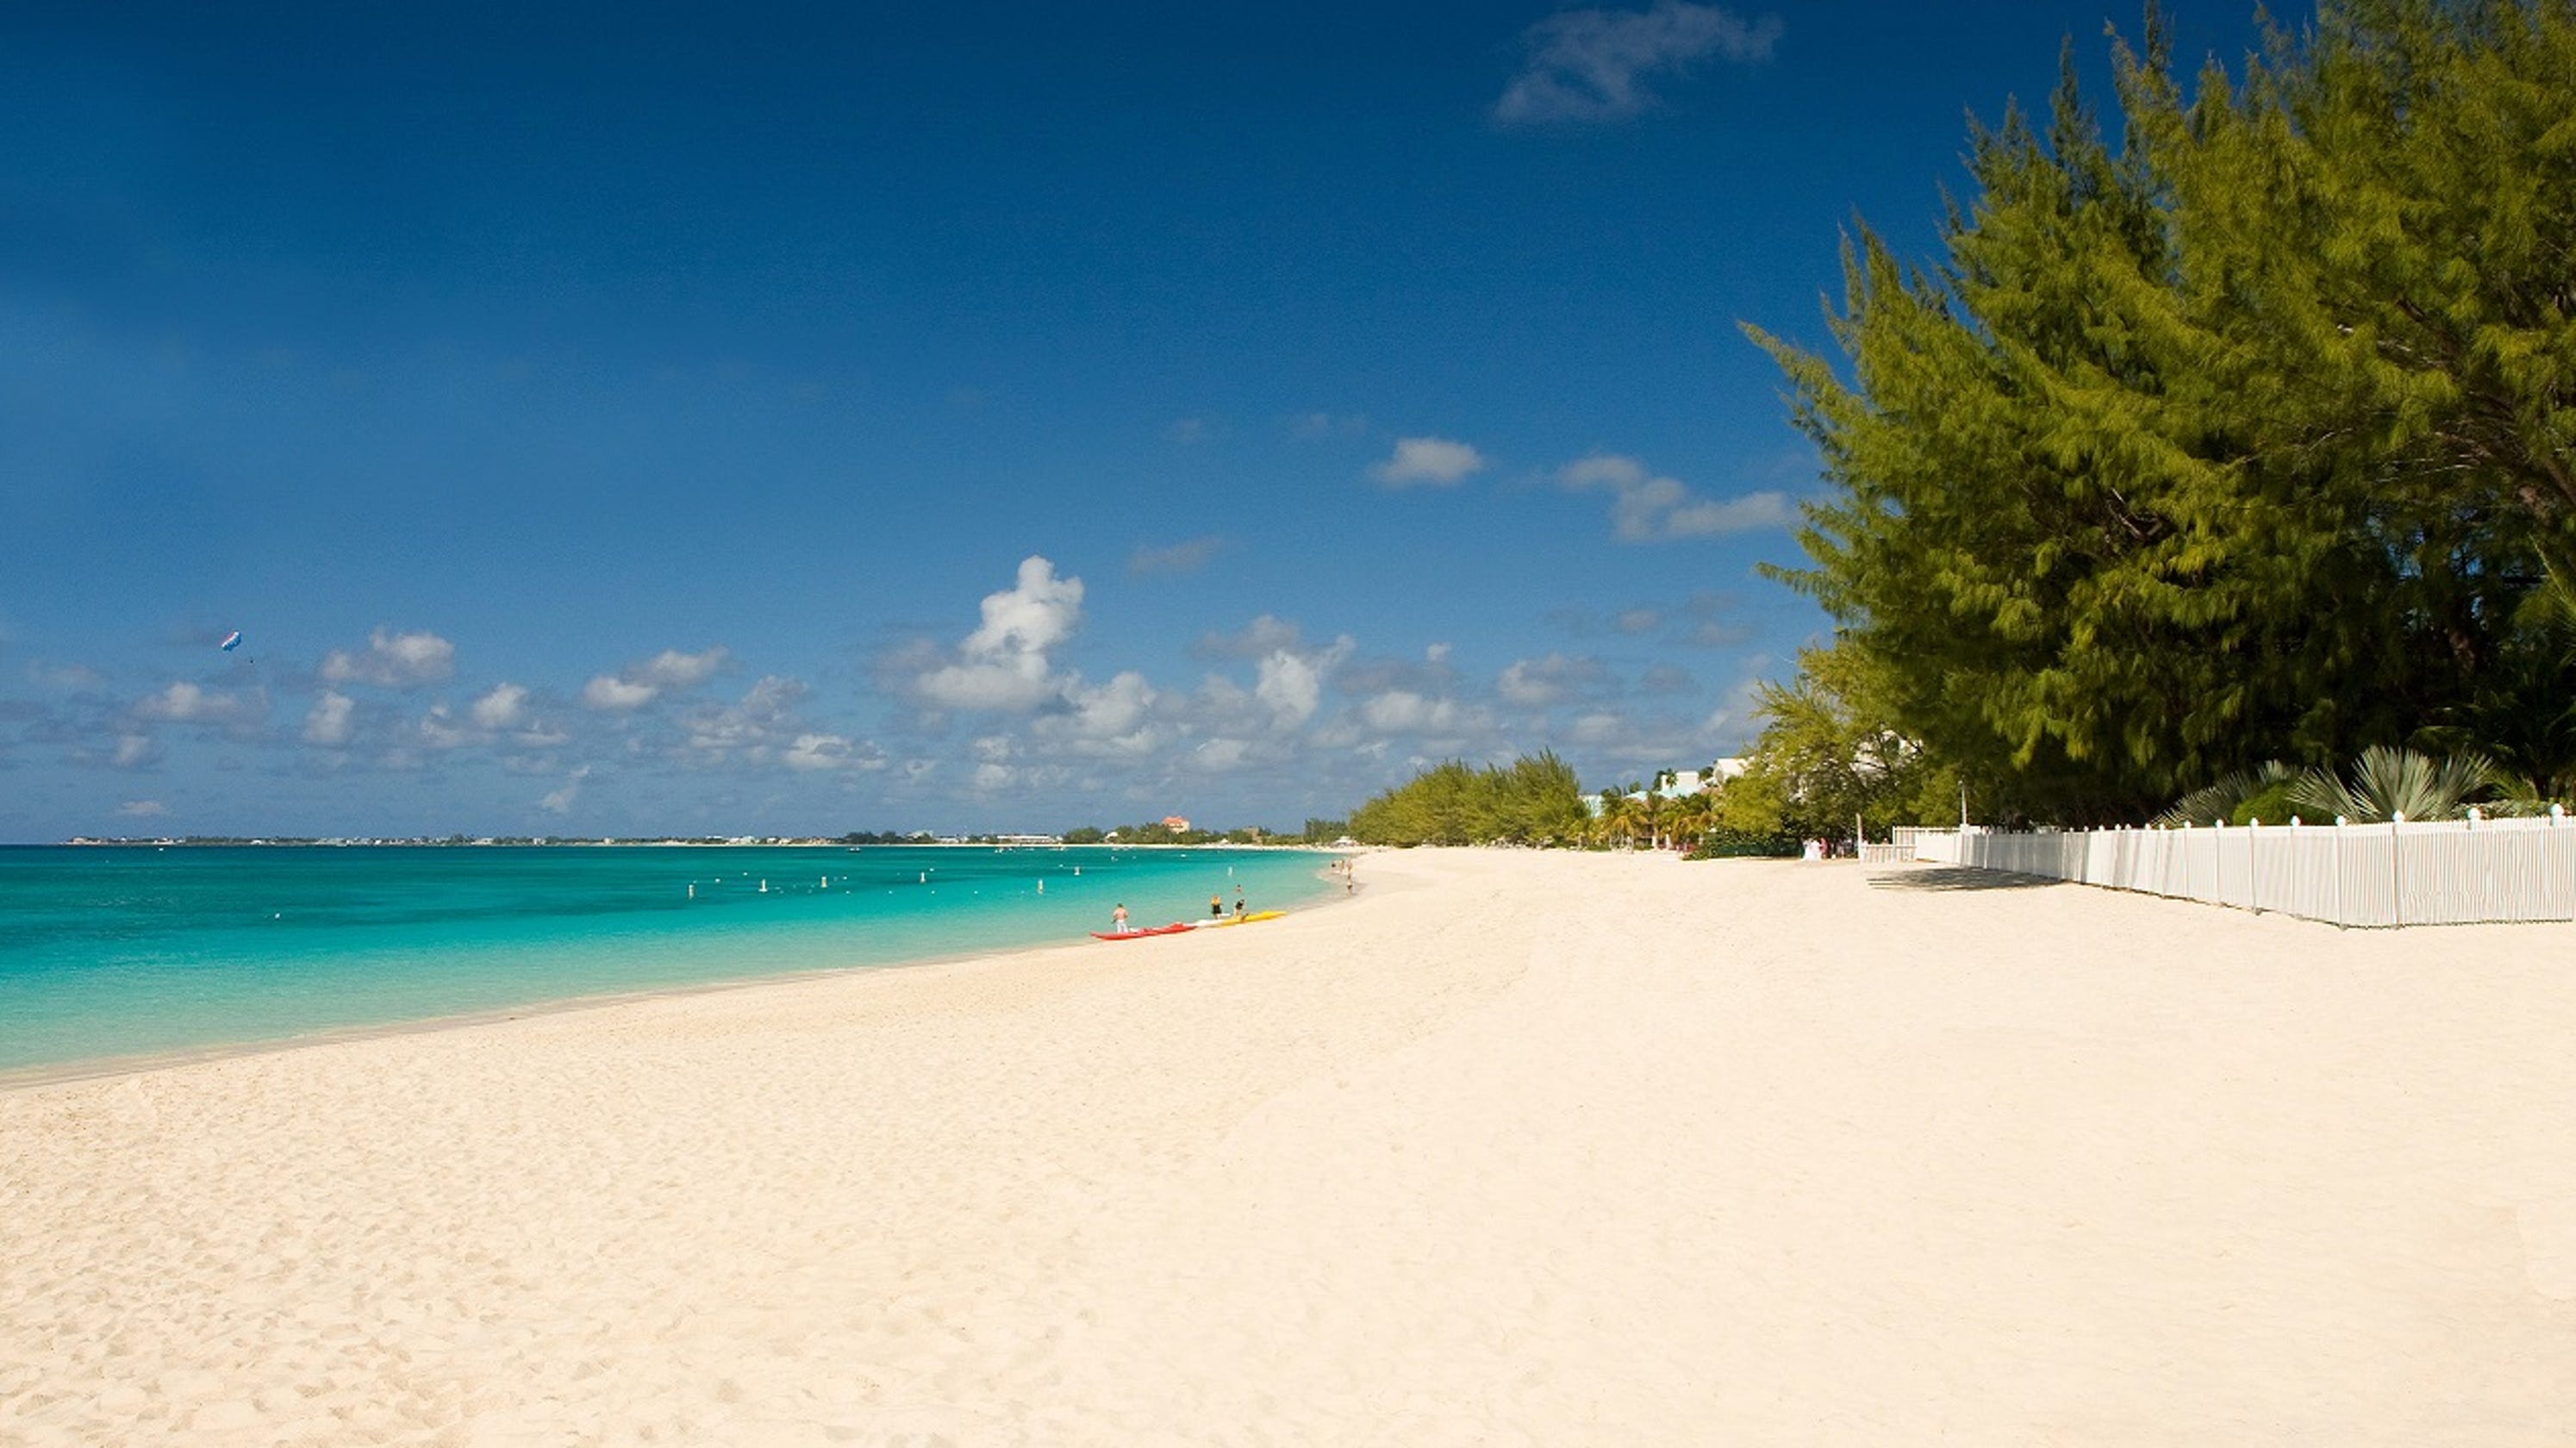 Grand Cayman guide for first-timers: Beaches, snorkeling, kayak tours